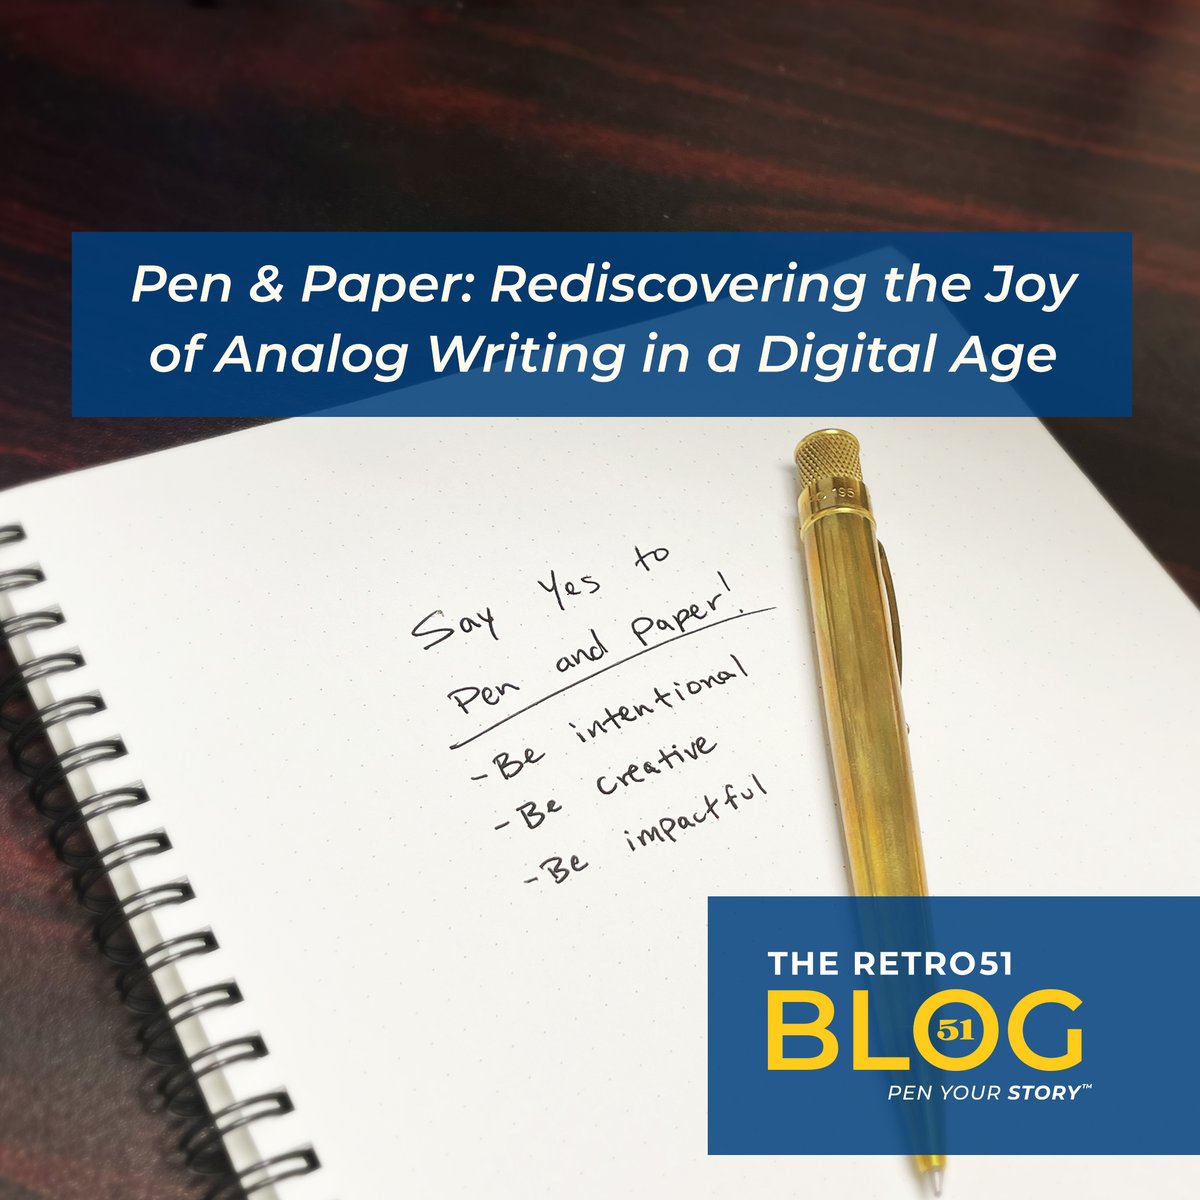 New Blog Post Alert! 🚨📄✨ Check out the latest post by Retro51 Designer Maclovio. He discusses why pen and paper are still important, if not more so, in the digital age and how he thinks Retro51 is helping with that. To read full blog, use link in the bio.